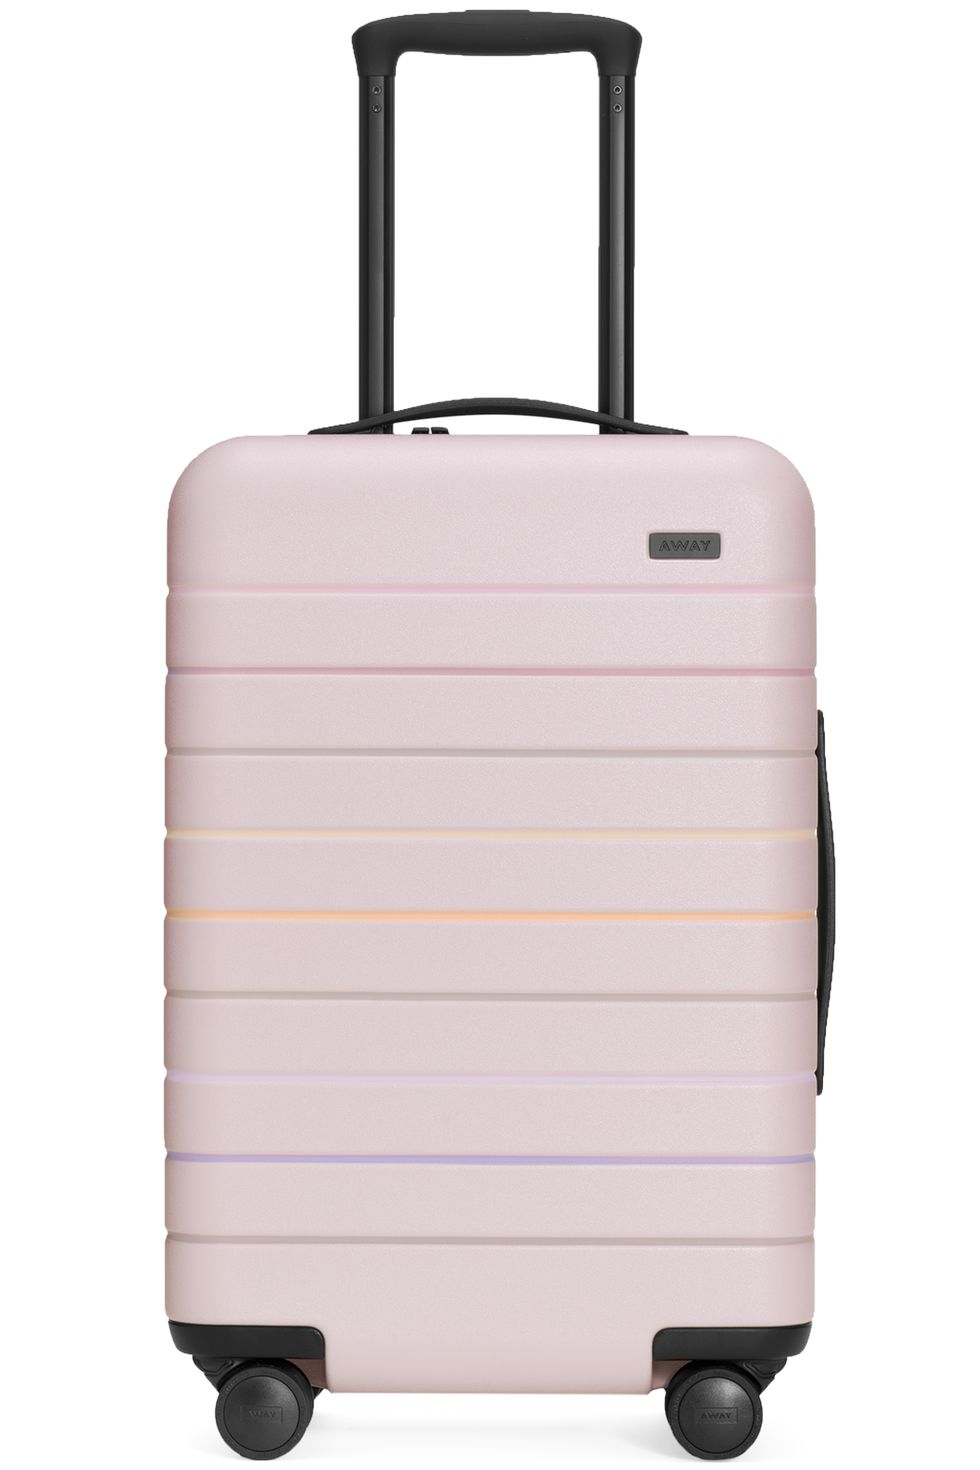 Away's New Art-Inspired Luggage Will Bring Some Creative Spirit to Your ...